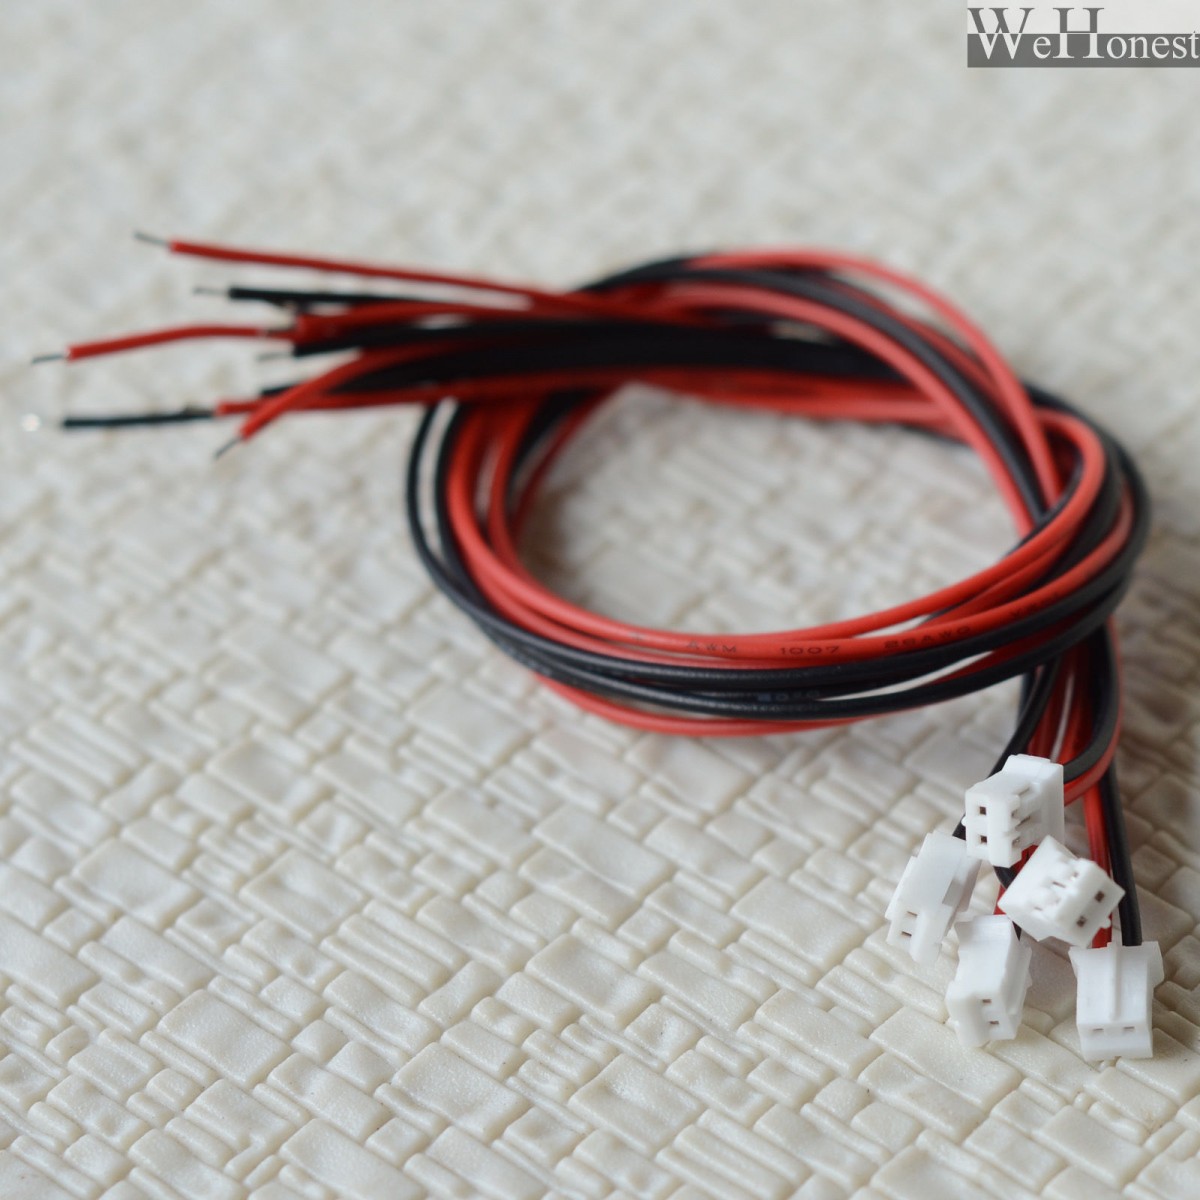 5 x mini plug kits 2 Pins JST 2.0mm Micro Connector male with 30cm wire cables